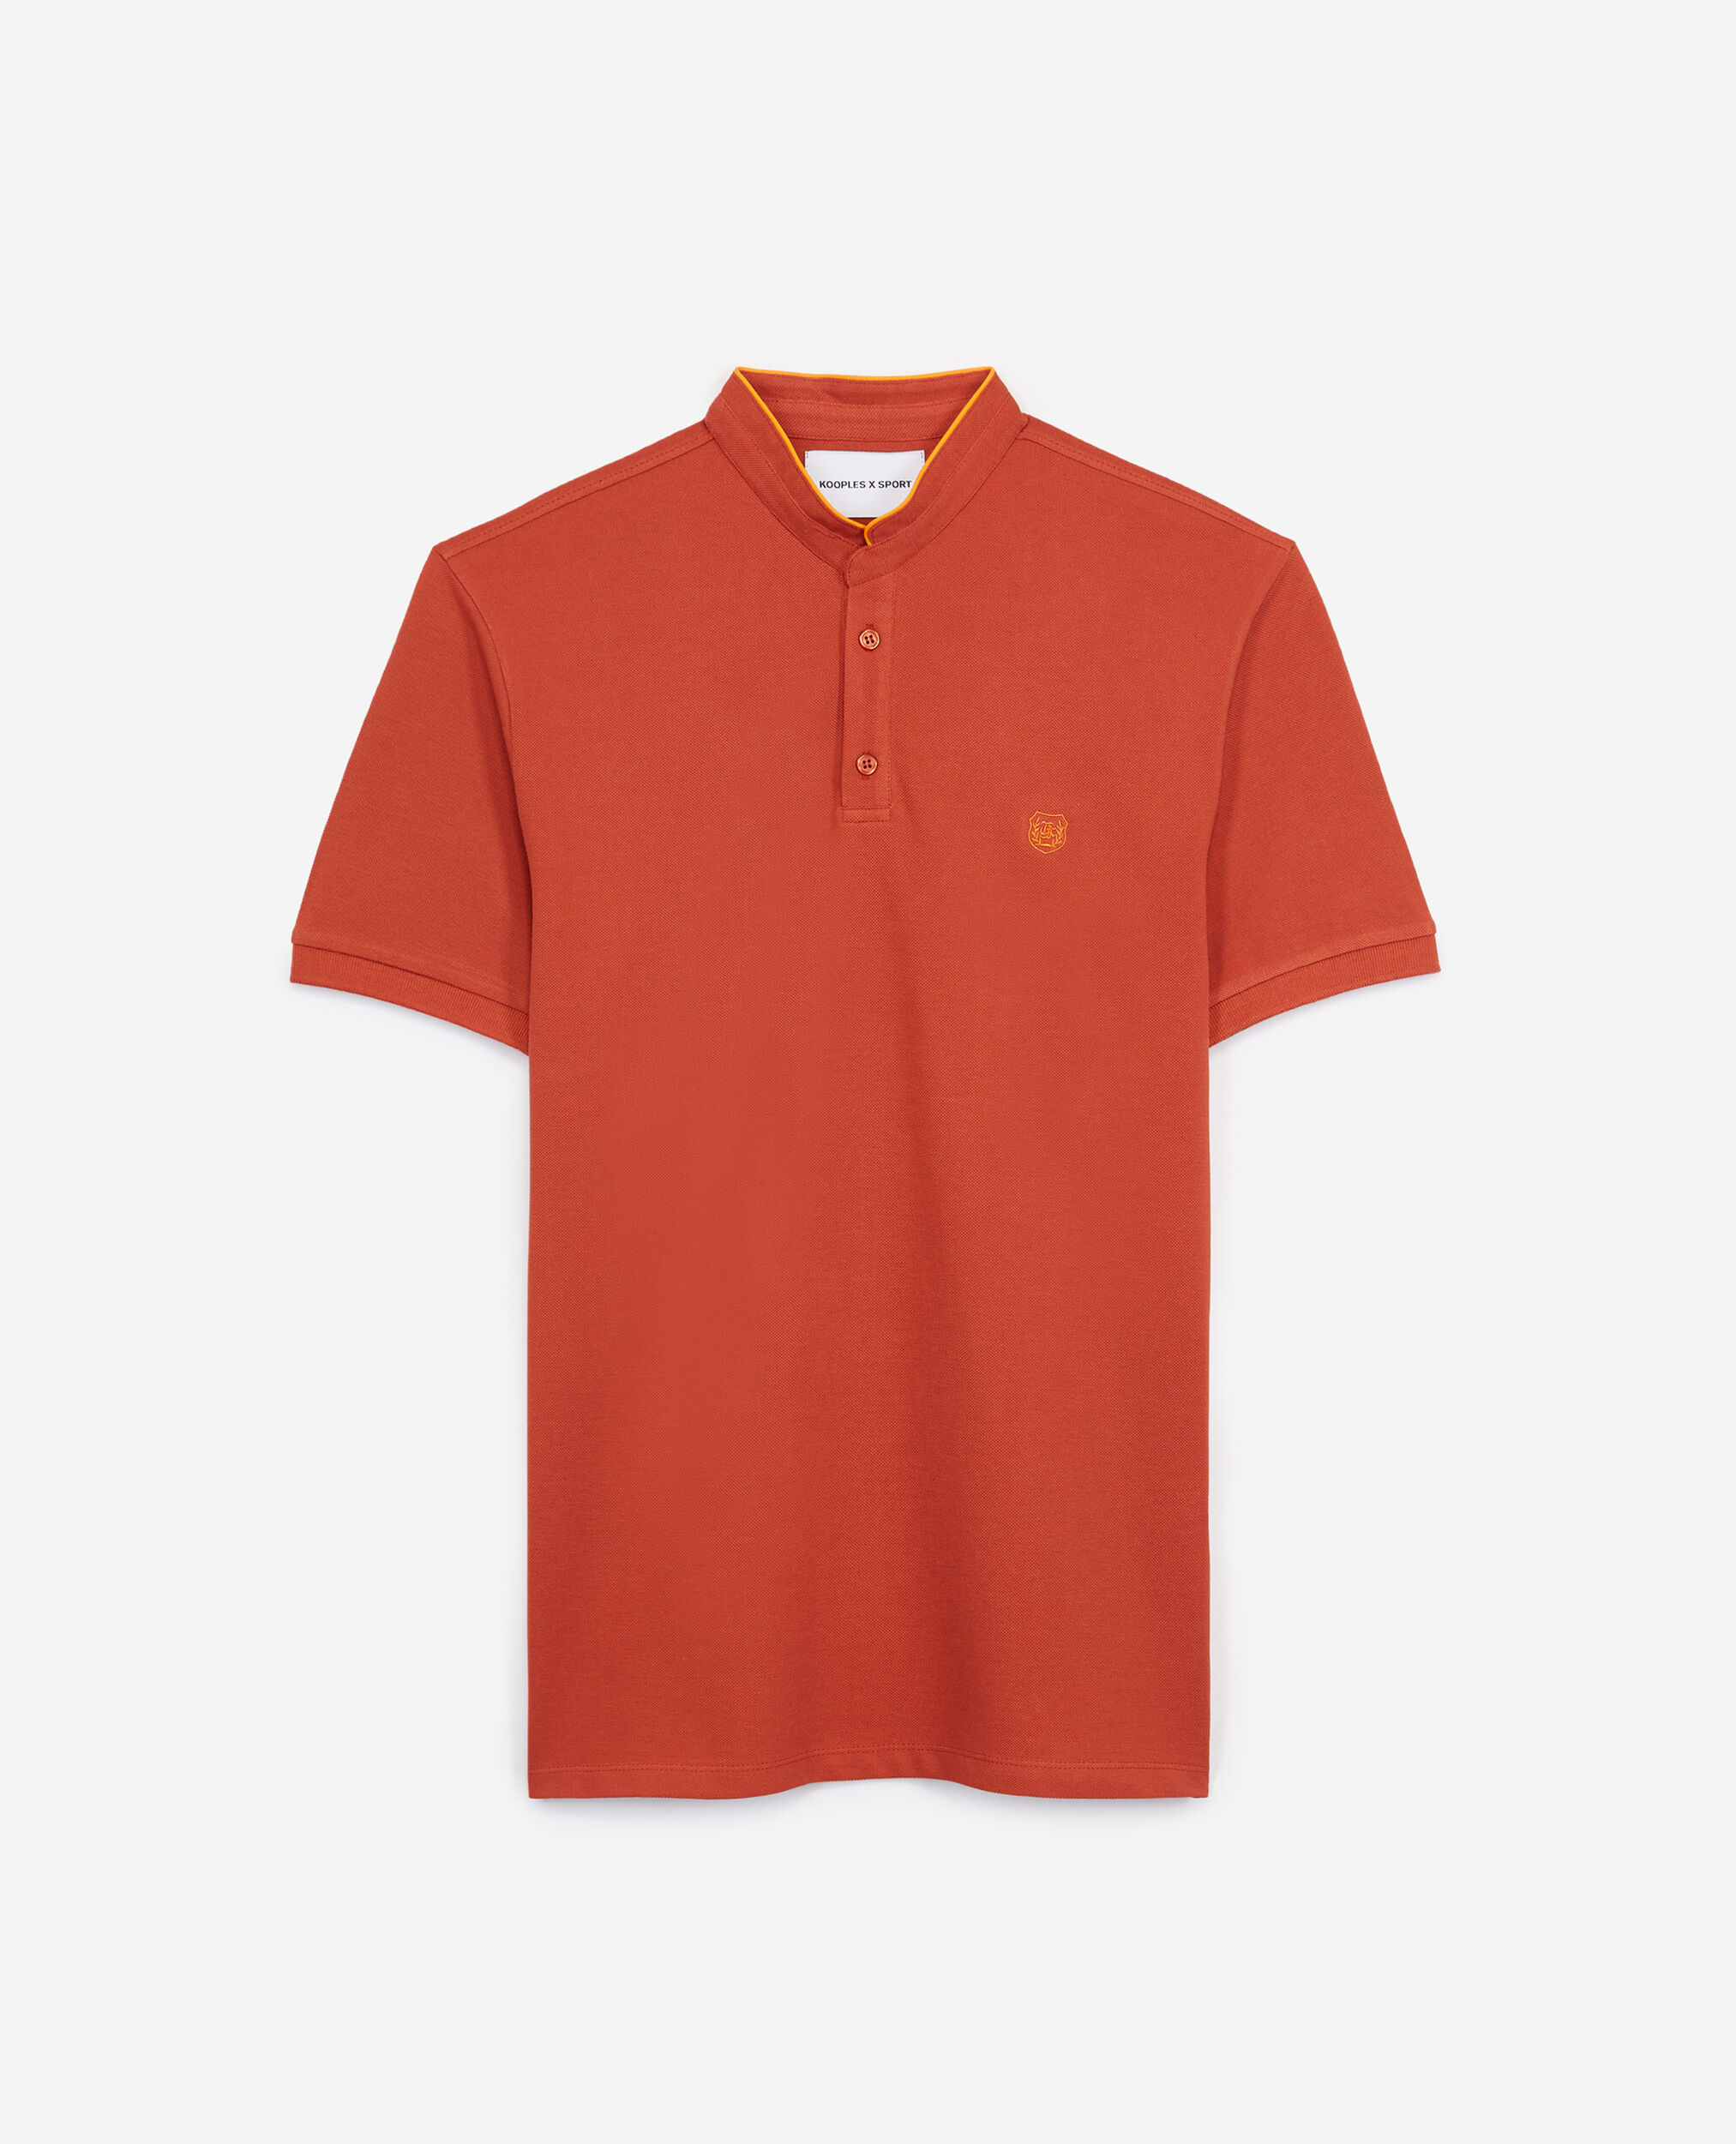 Orange polo with clementine details, ROOBOIS ORG / CLEMENTINE, hi-res image number null